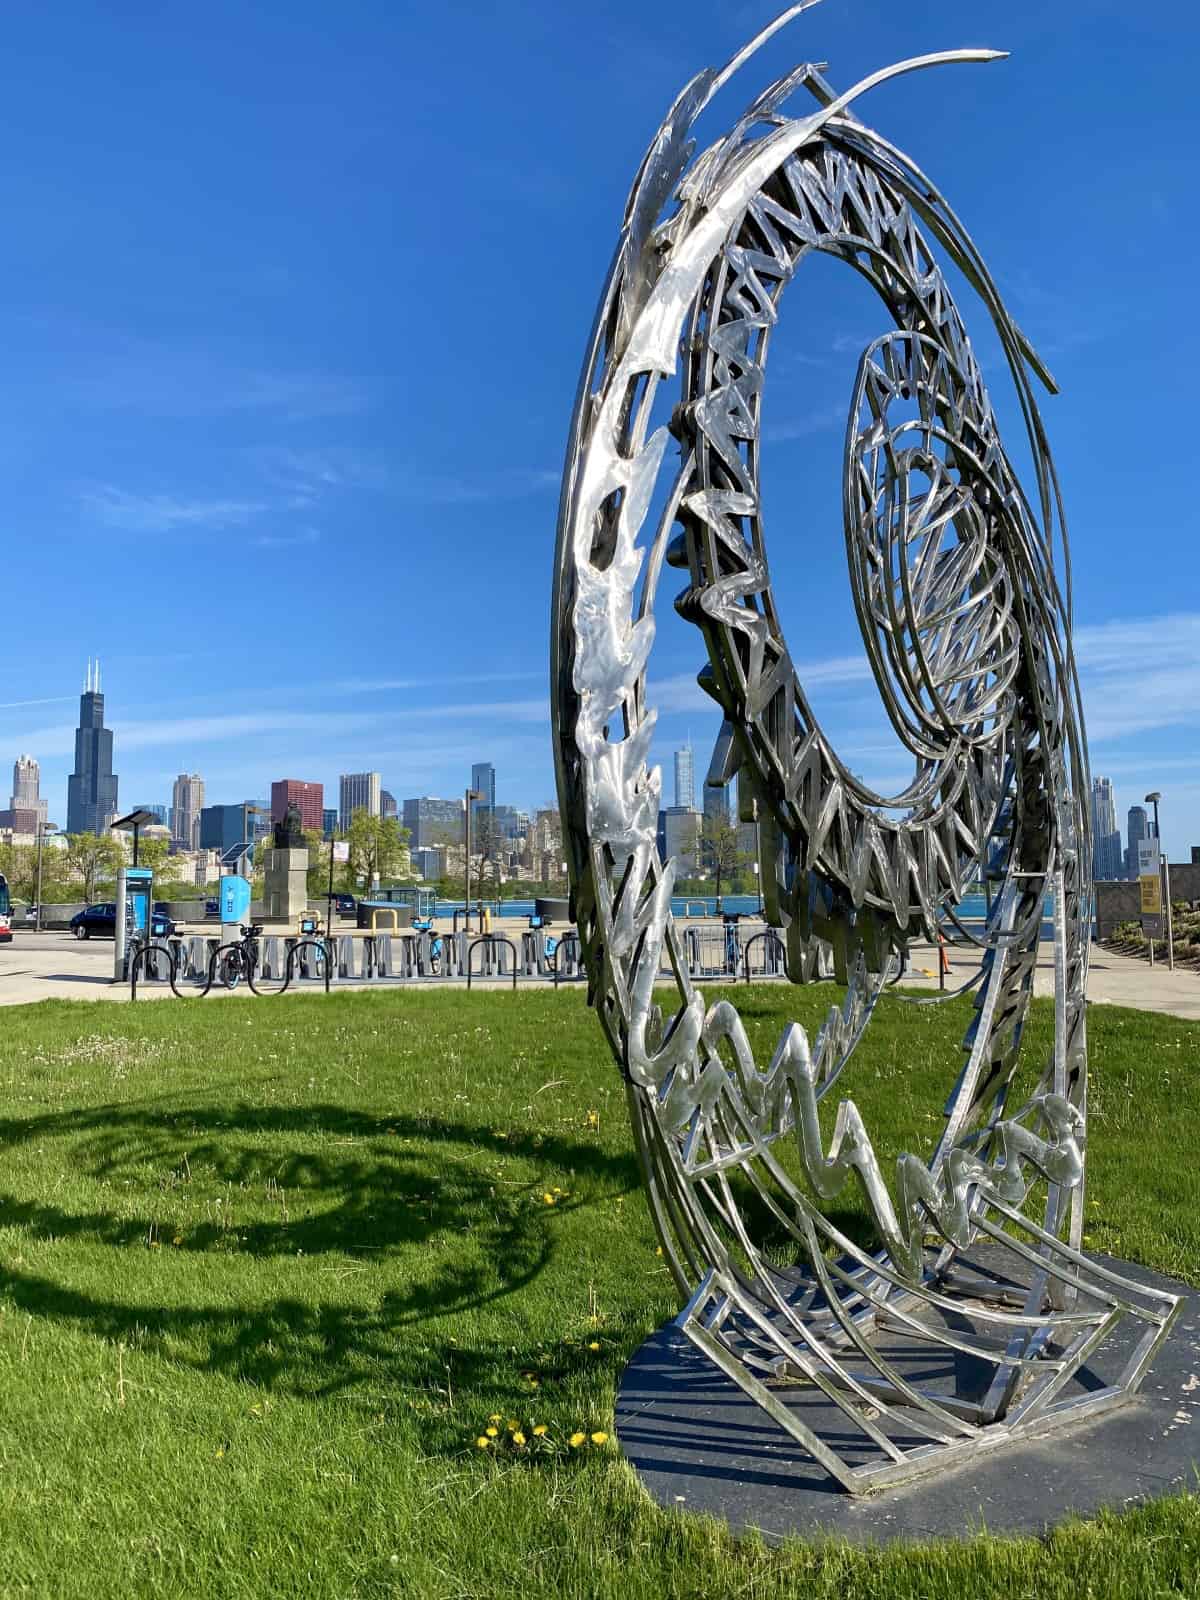 where to stay in chicago,things to do in chicago